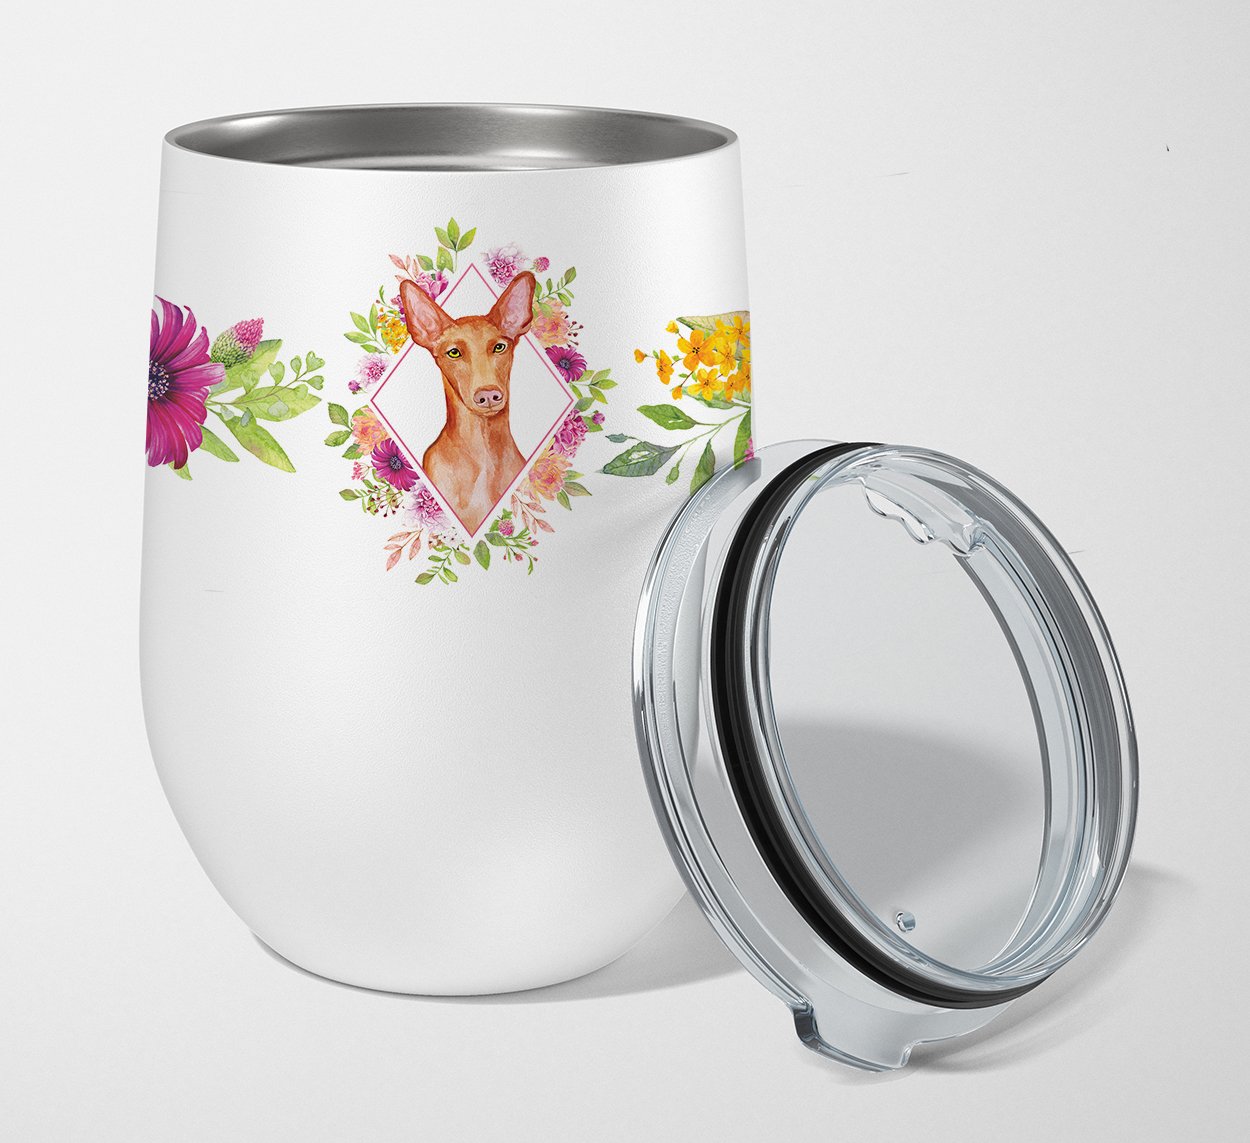 Pharaoh Hound Pink Flowers Stainless Steel 12 oz Stemless Wine Glass CK4168TBL12 by Caroline's Treasures